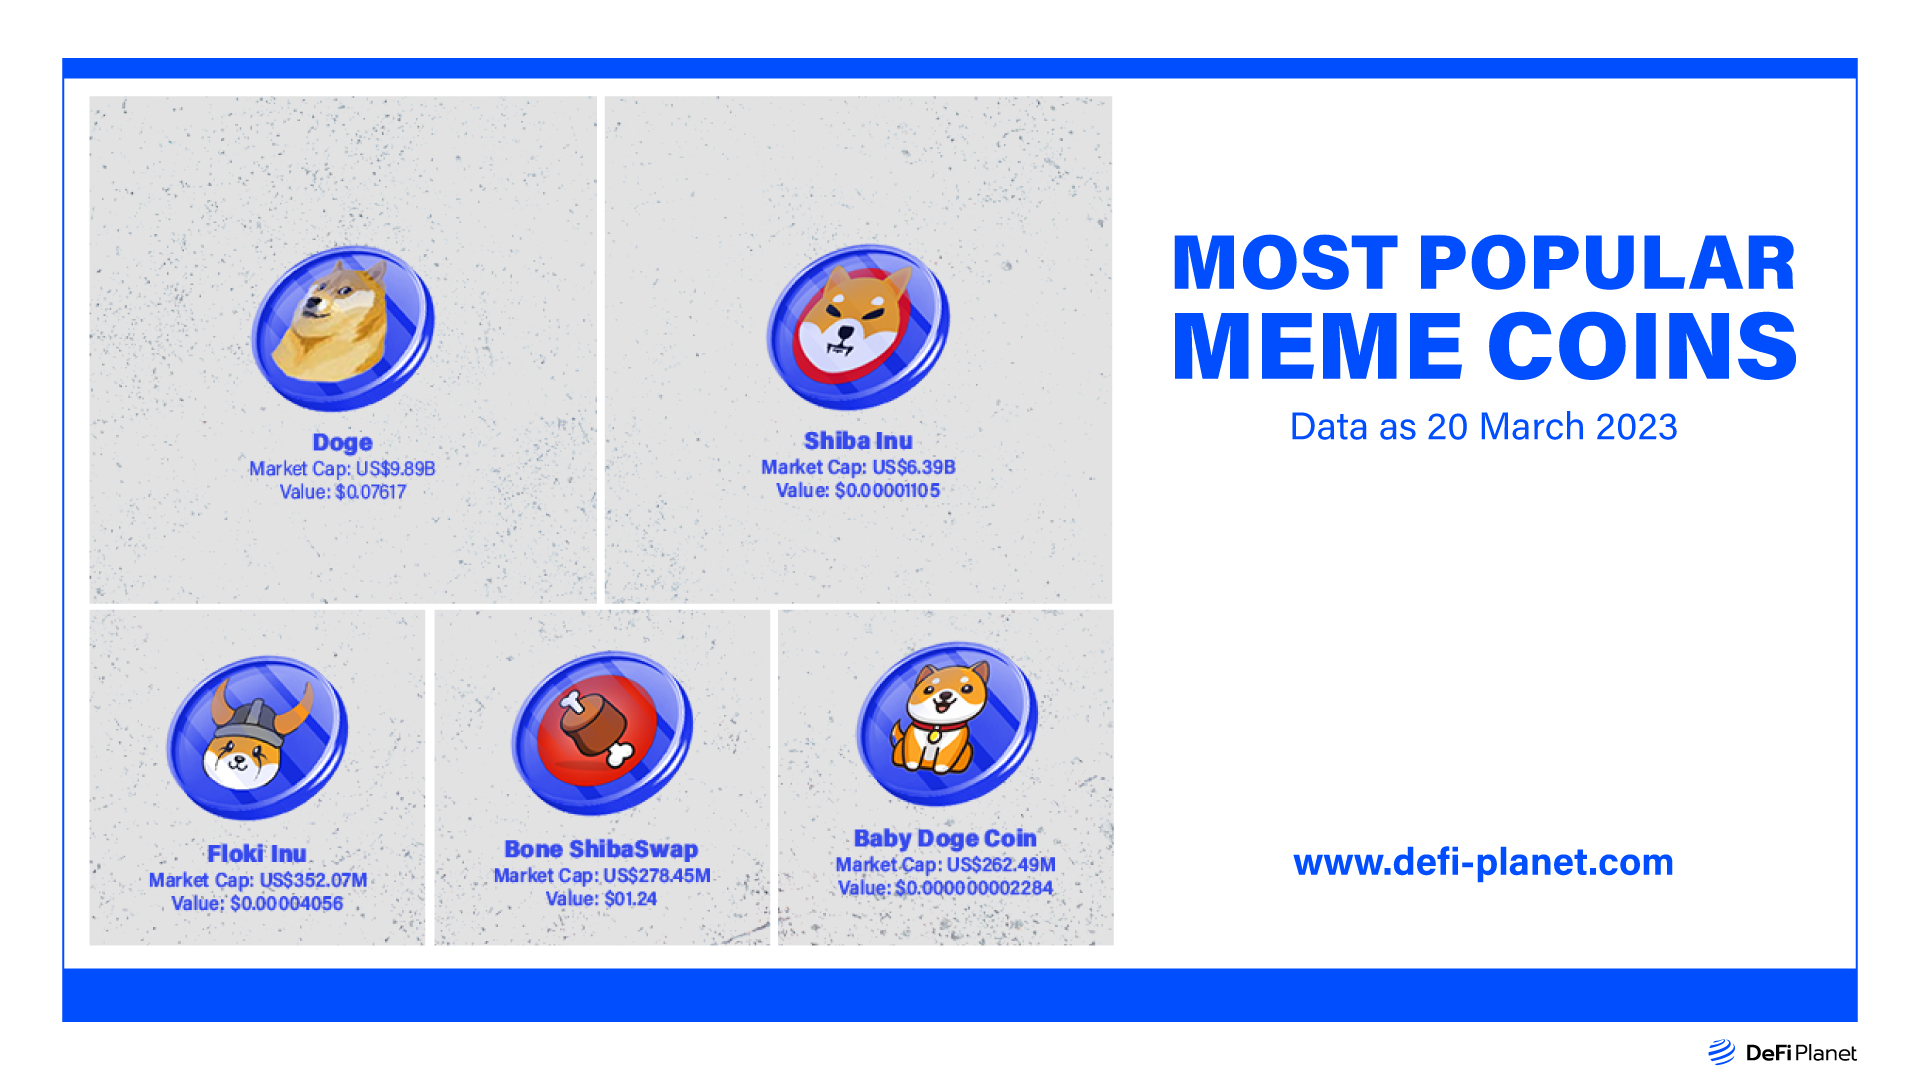 Image of popular meme coins, current value, and market cap 